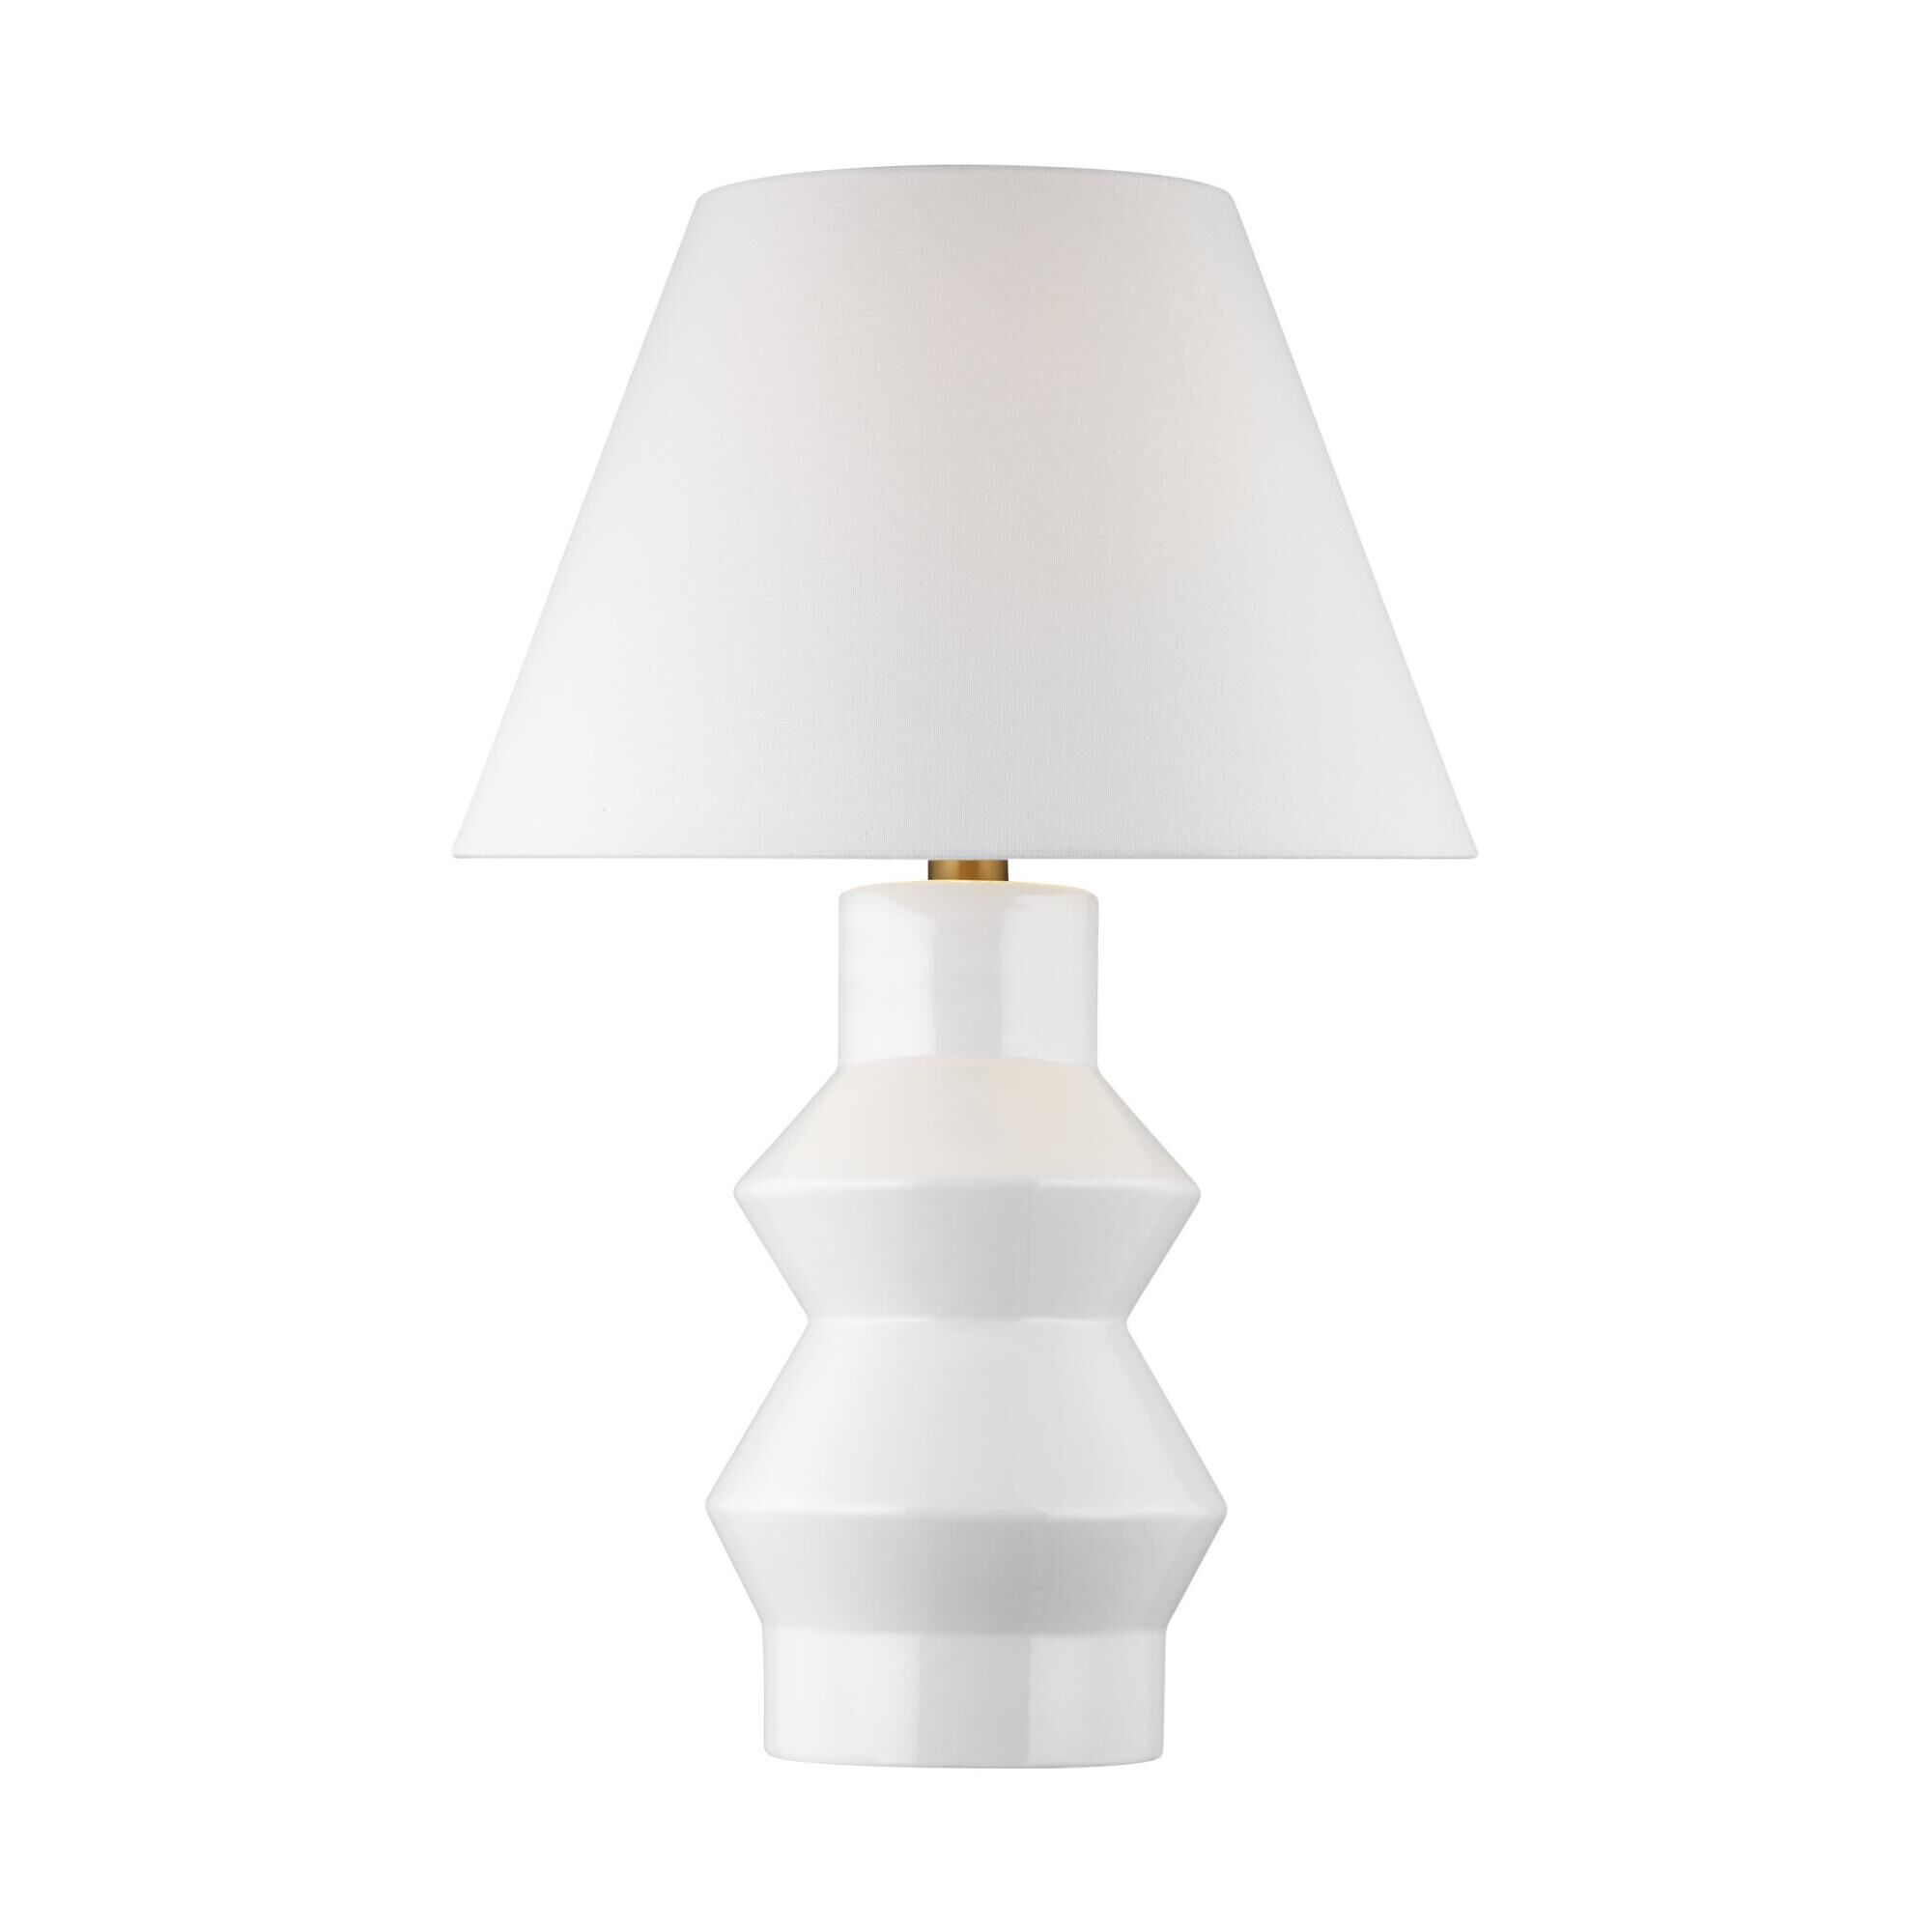 Chapman & Myers Abaco 28 Inch Table Lamp by Generation Lighting | Capitol Lighting 1800lighting.com